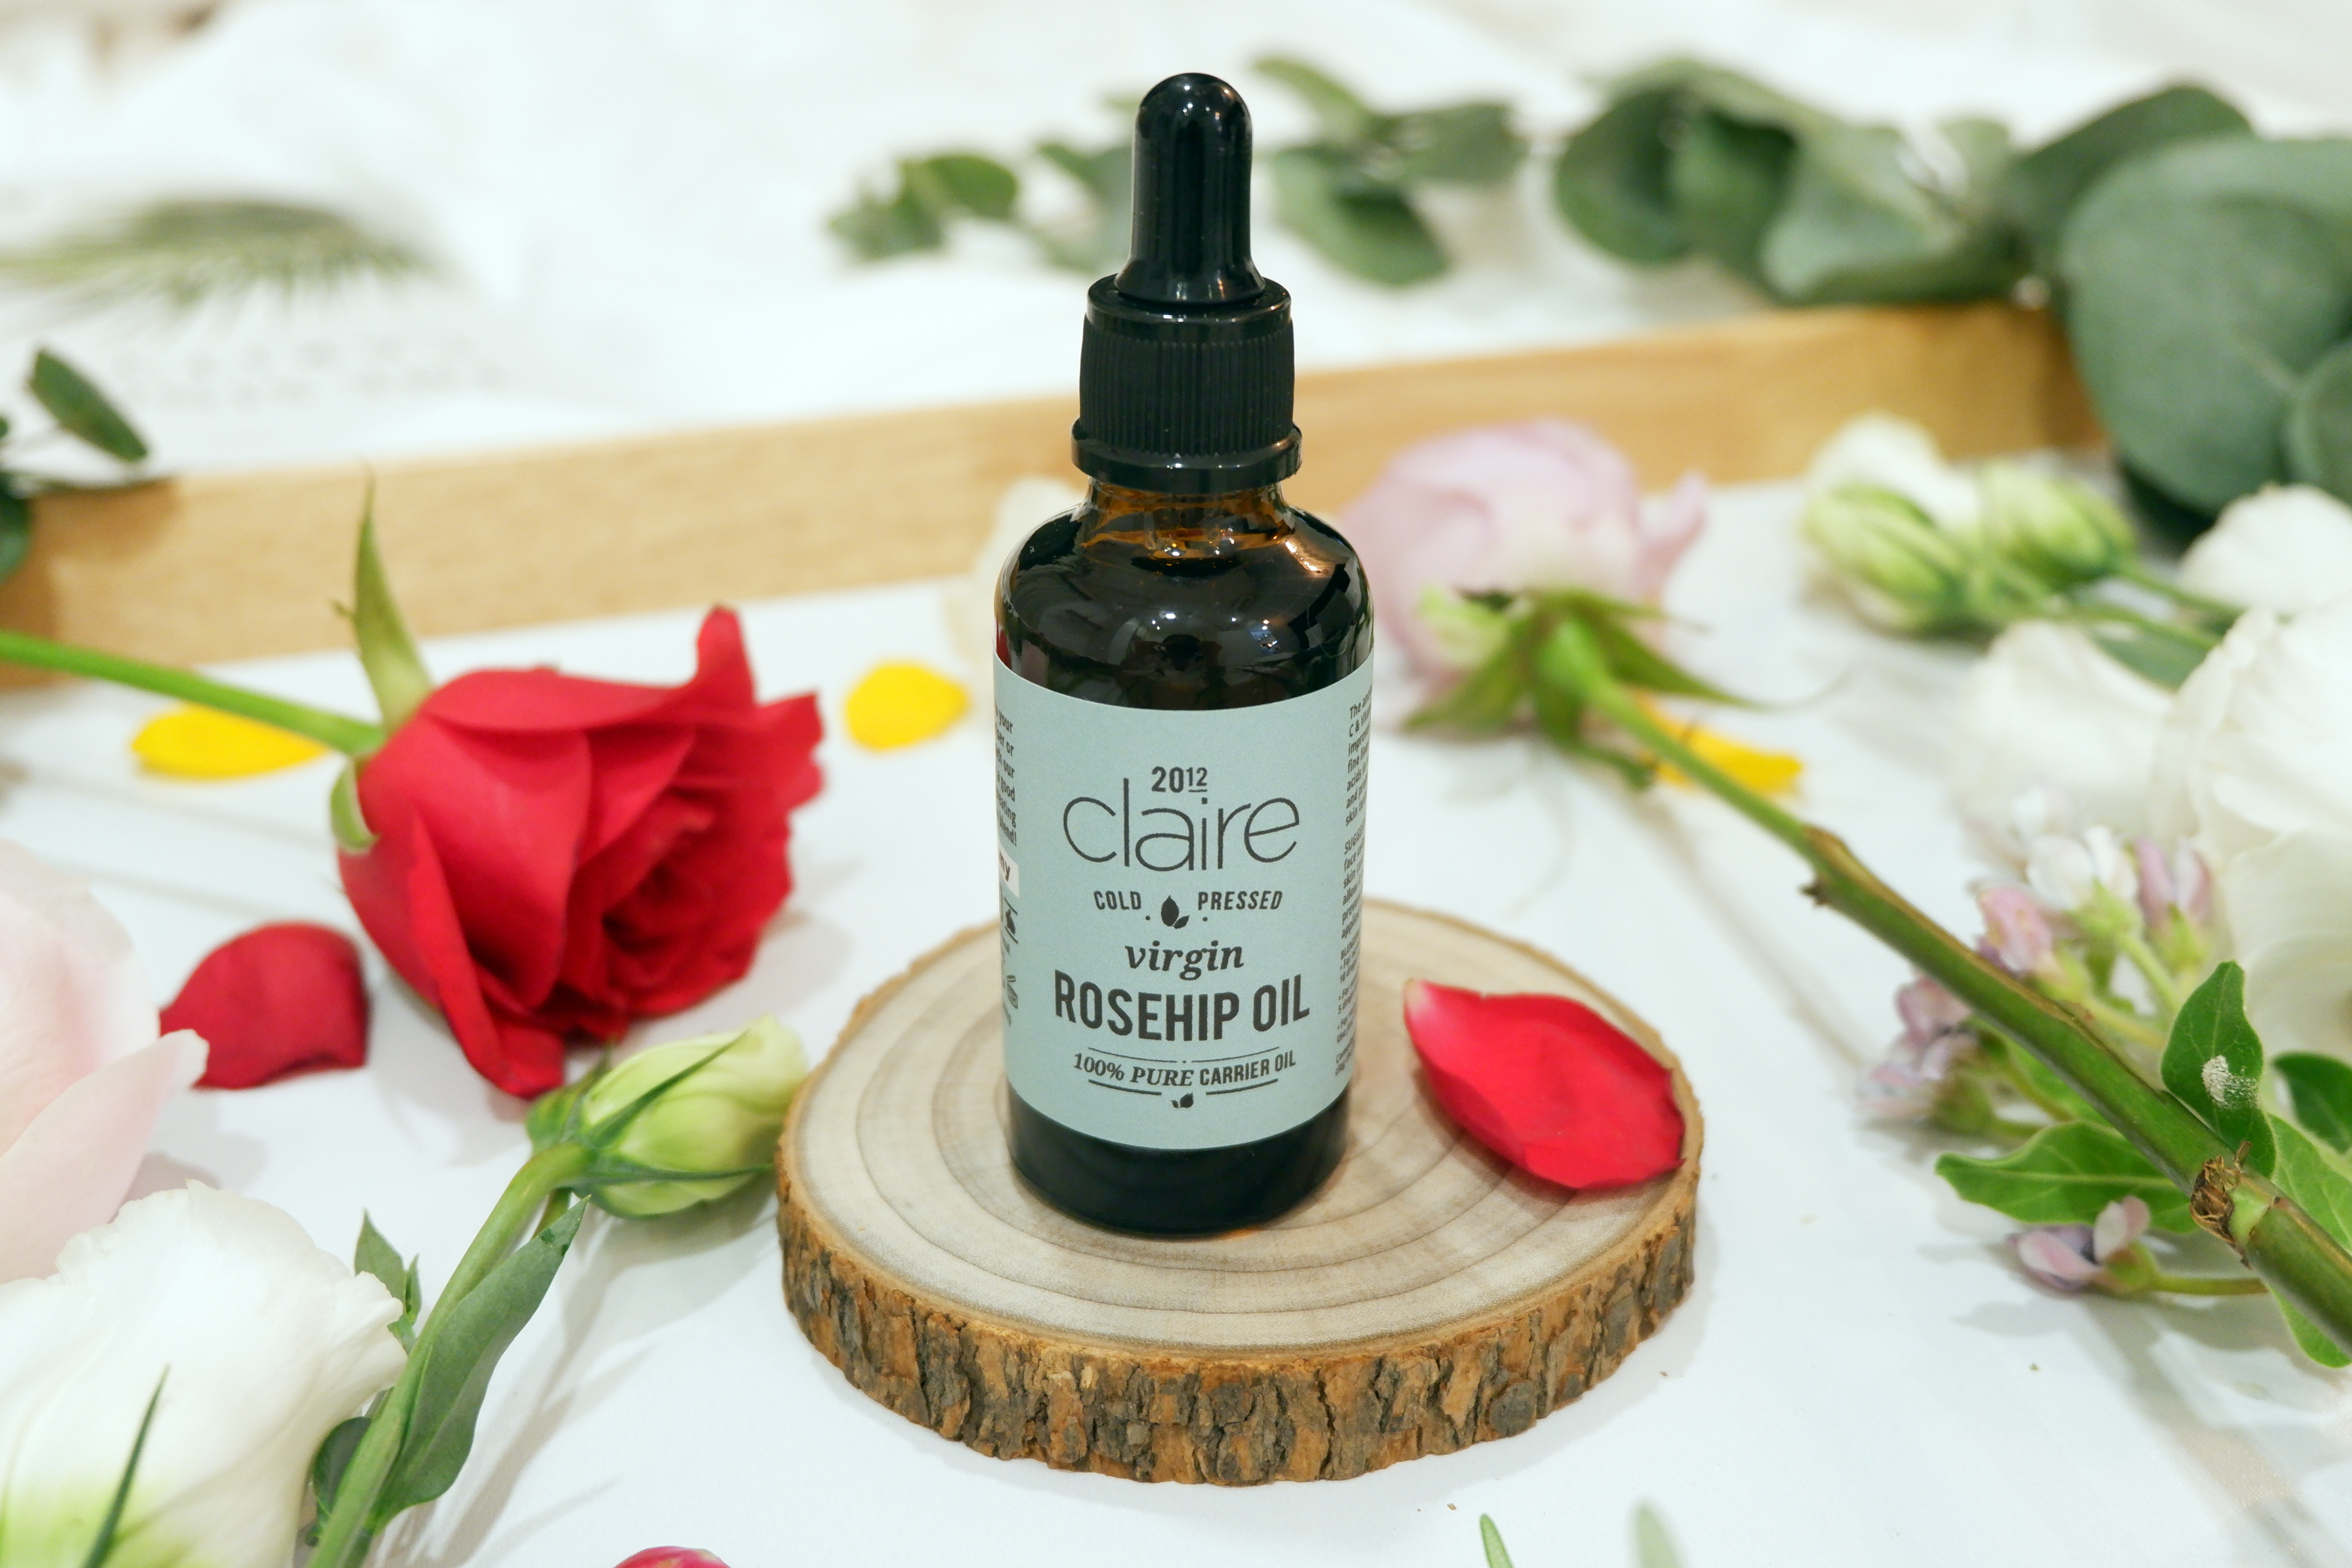 Claire Organics Virgin Rose Hips Seed Oil 